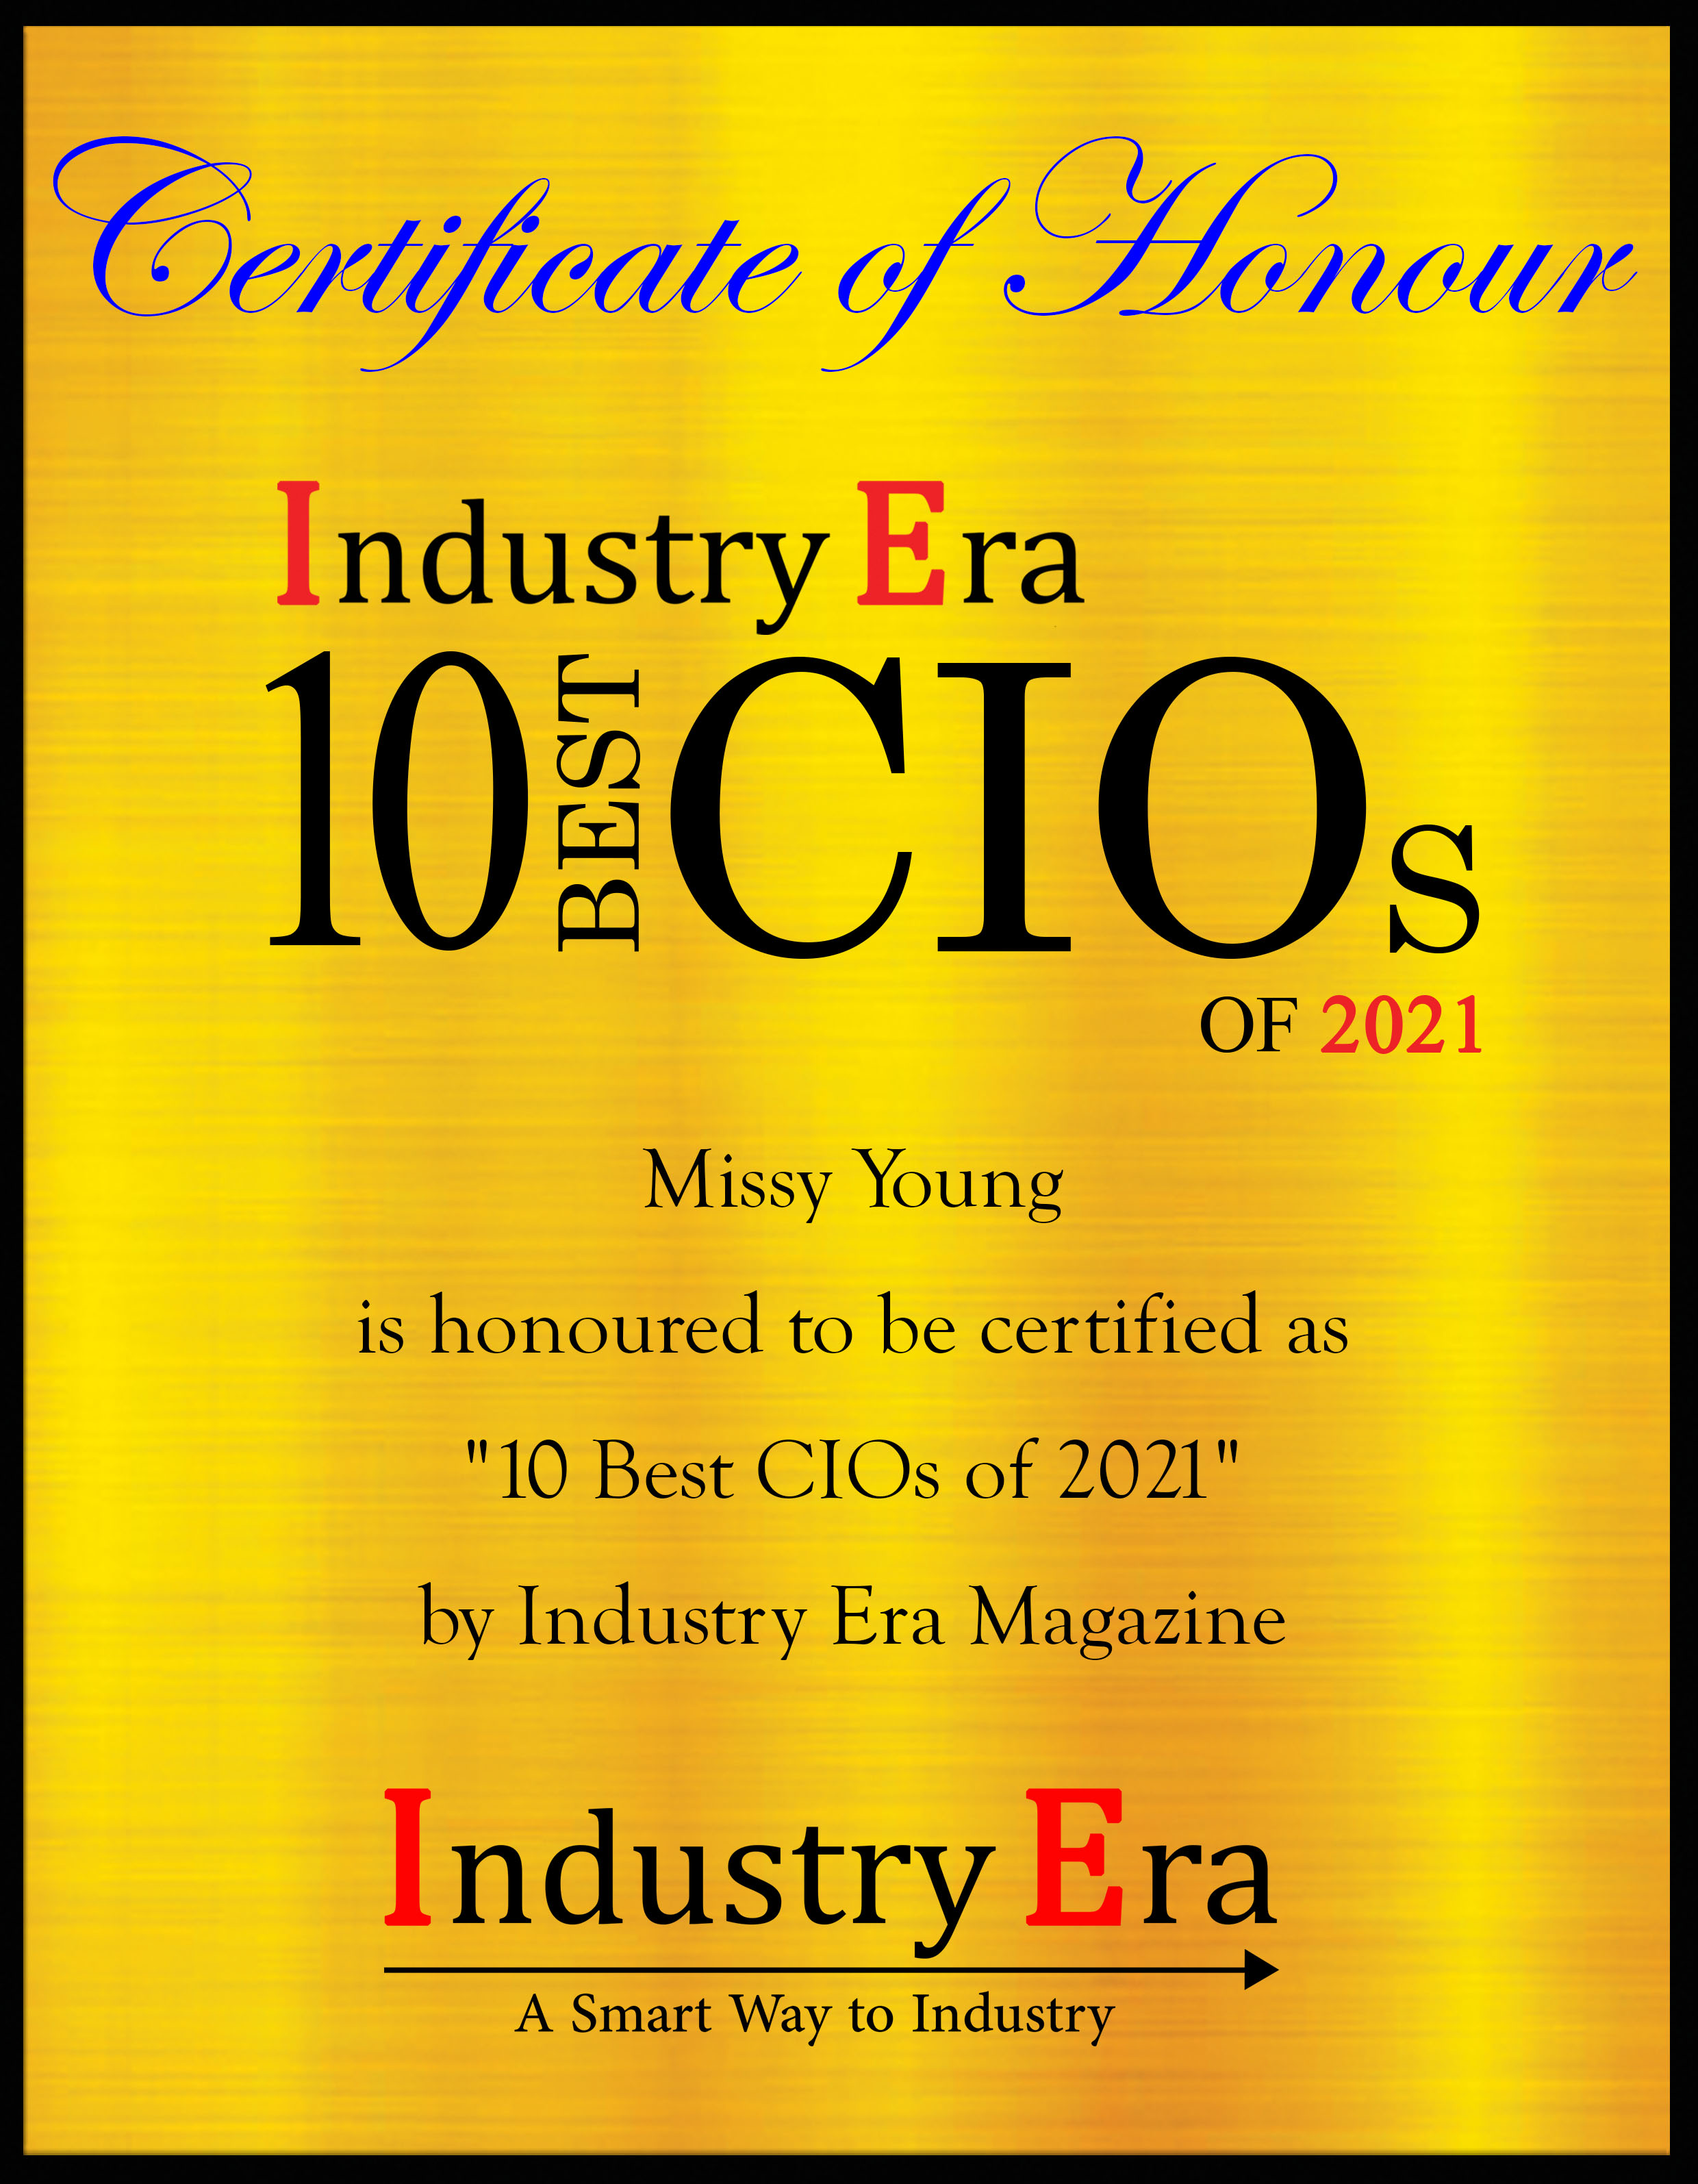 Missy Young CIO of Switch, Best CIOs of 2021